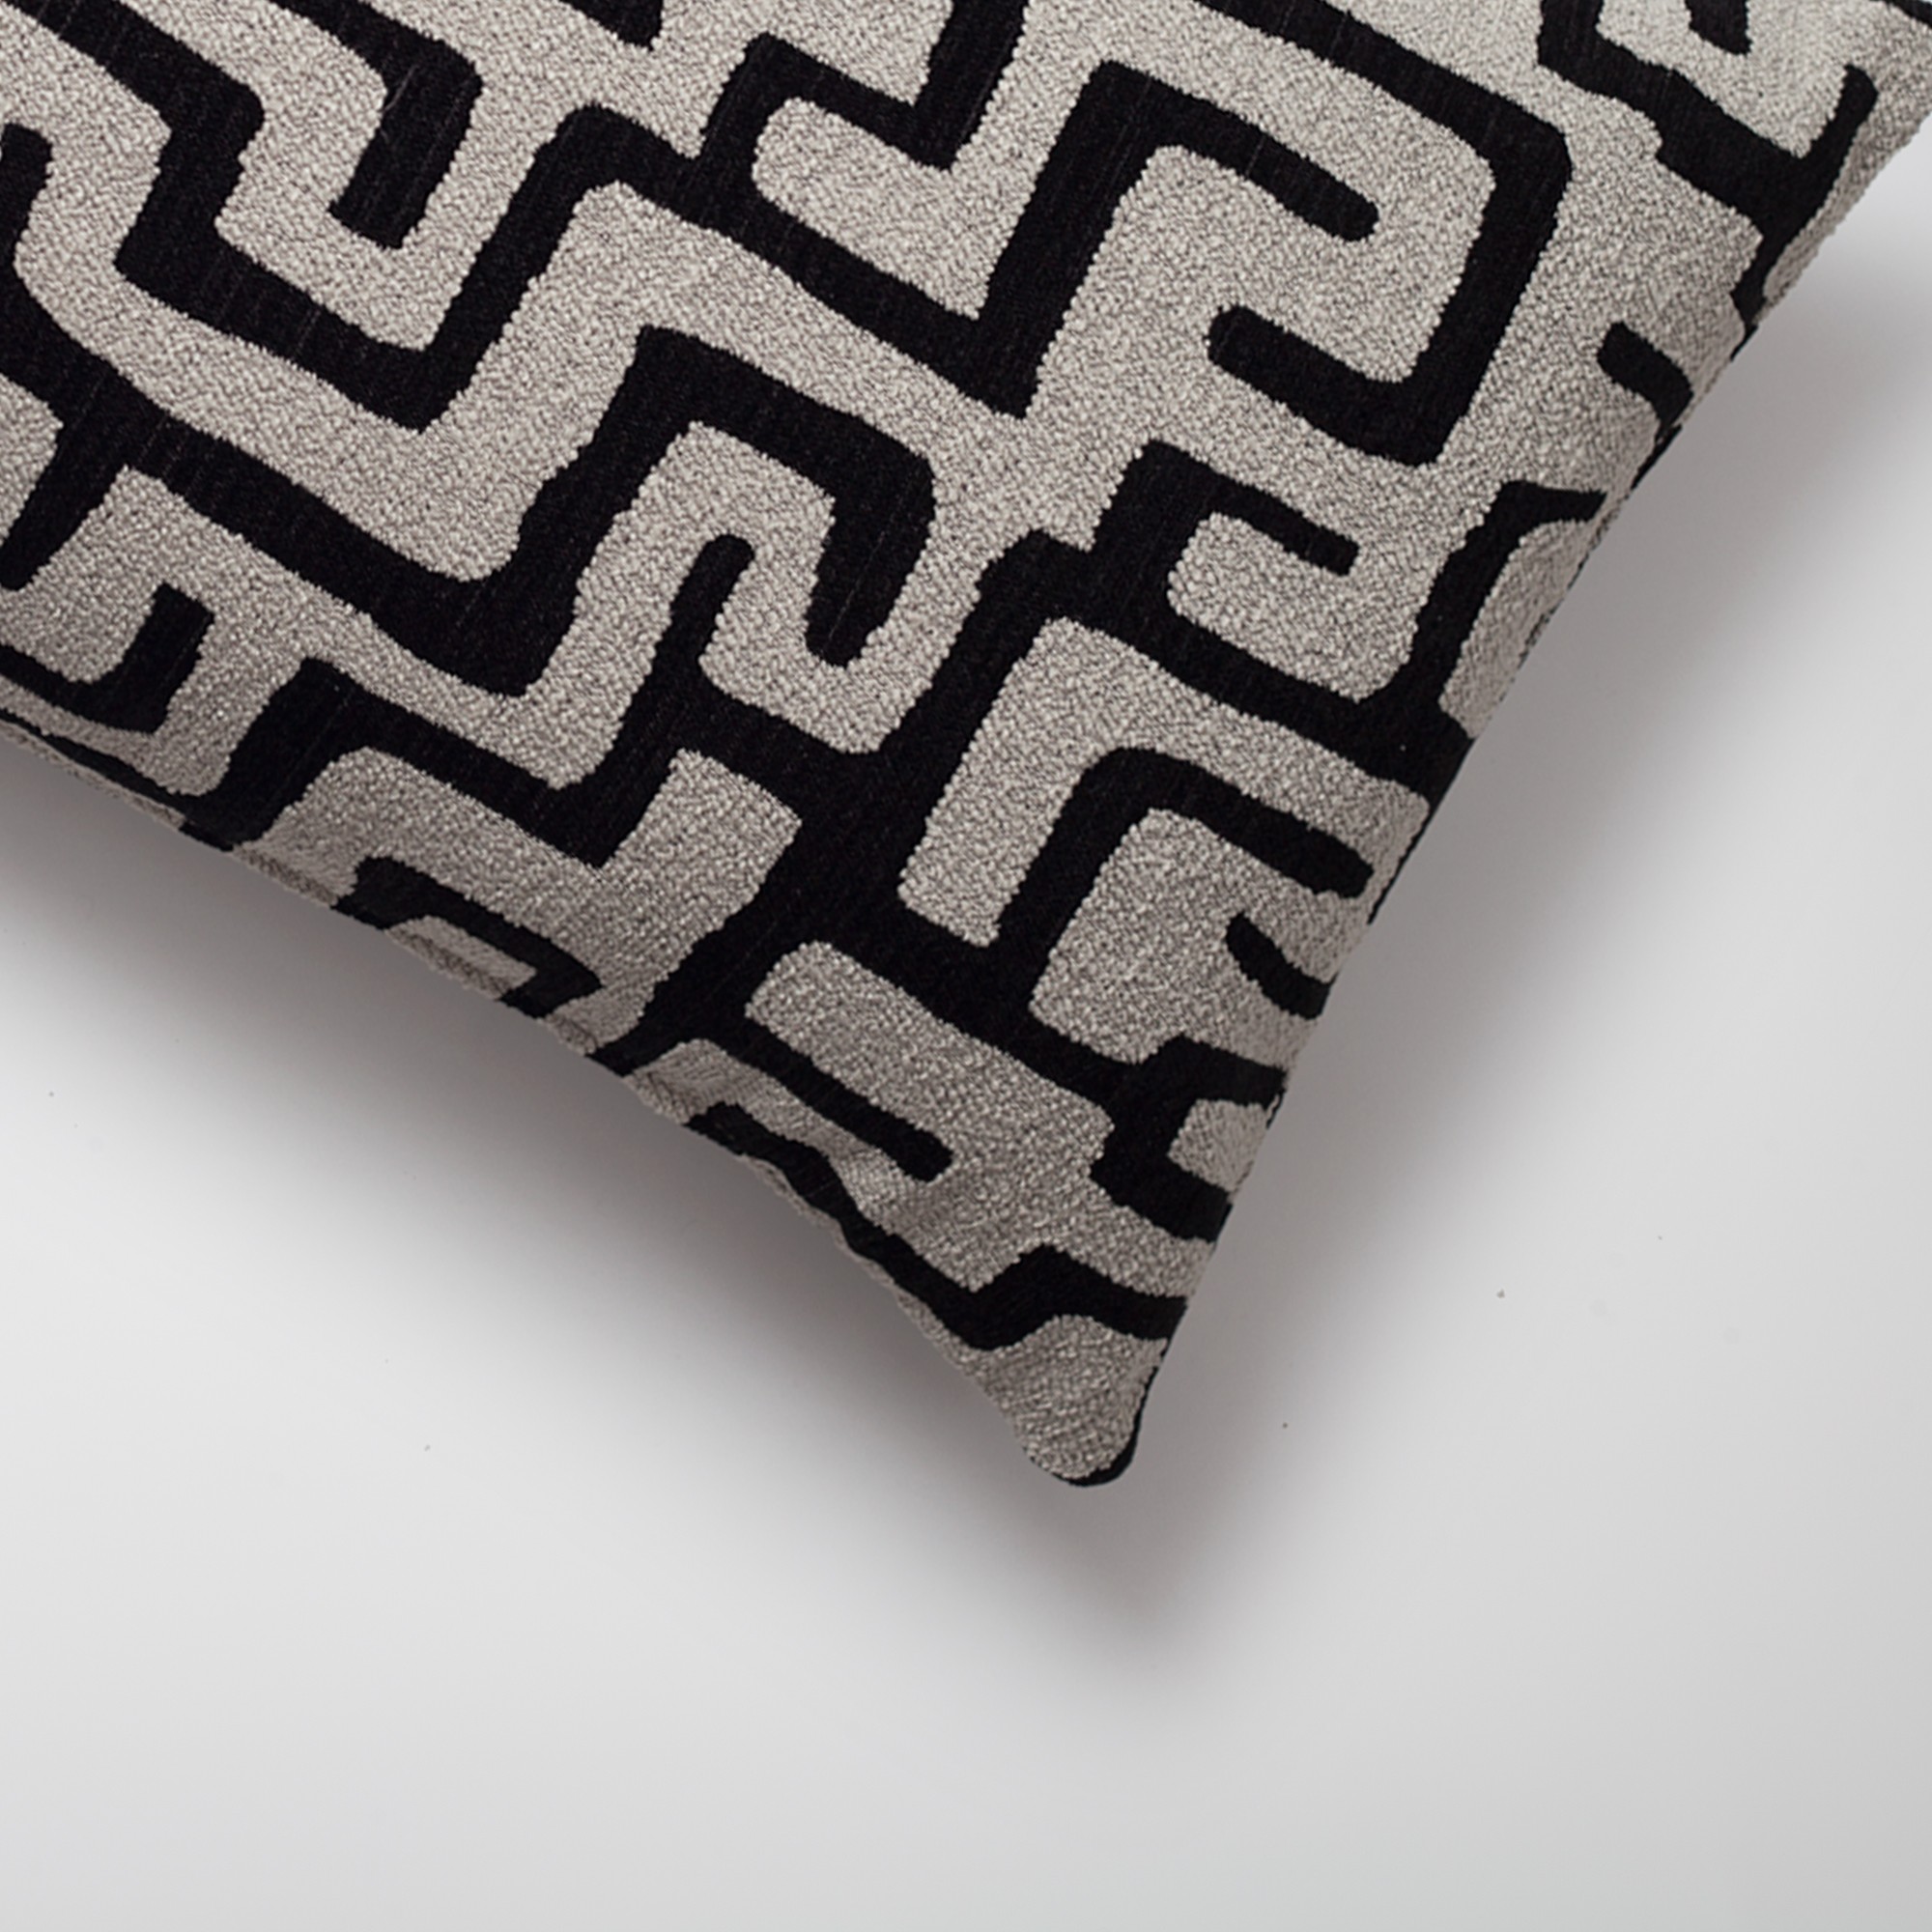 "Norm" - Maze Patterned 14x28 Inch Pillow - Black (Cover Only)